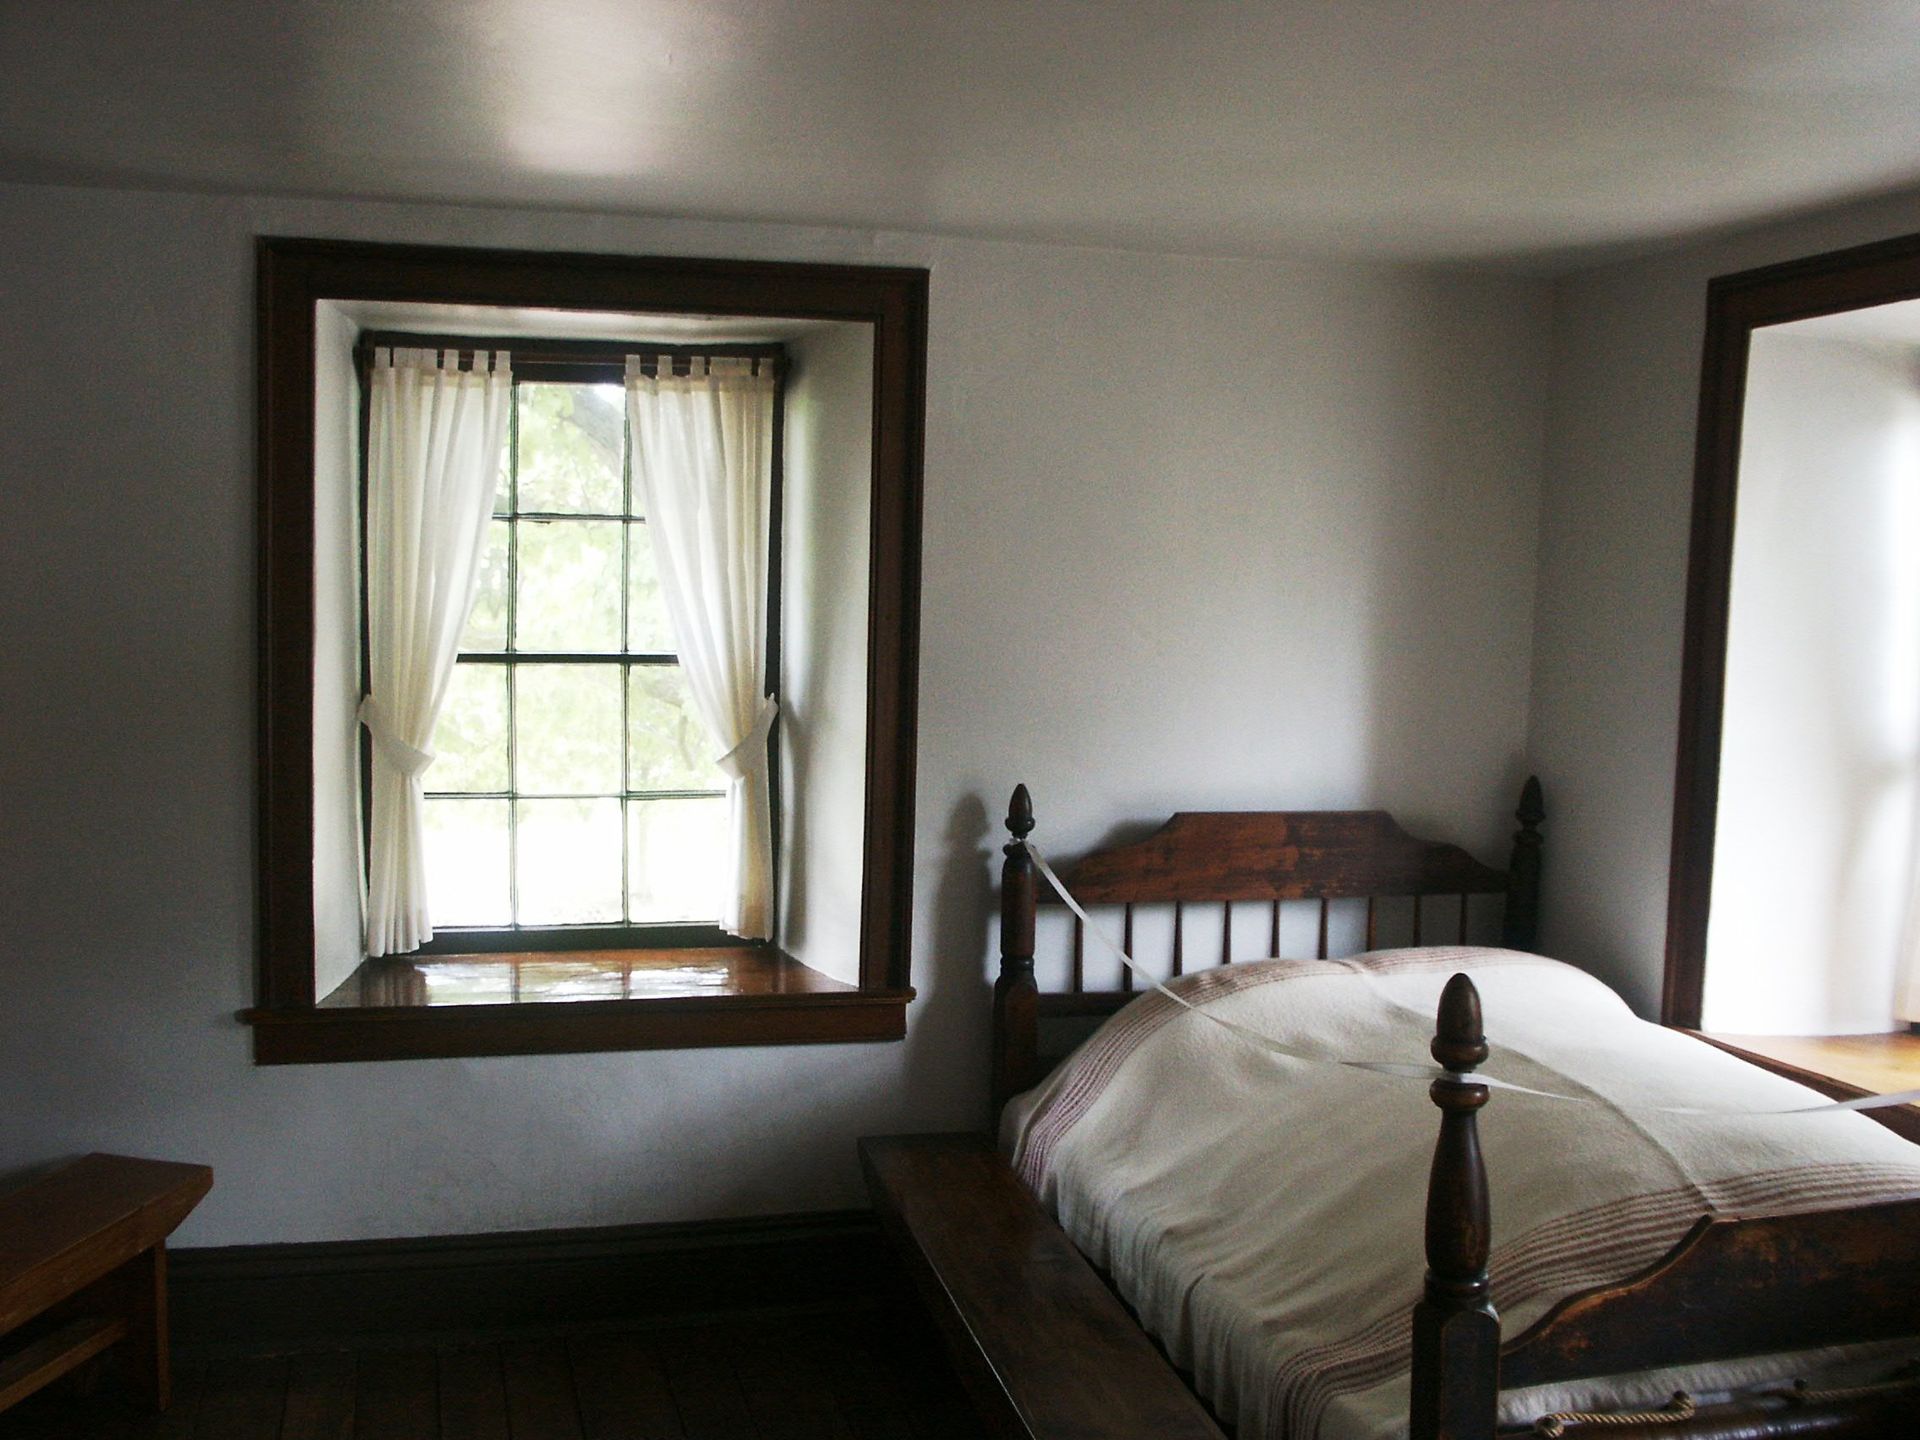 An image of the bed in the Carthage Jail bedroom where Joseph and Hyrum Smith were martyred.